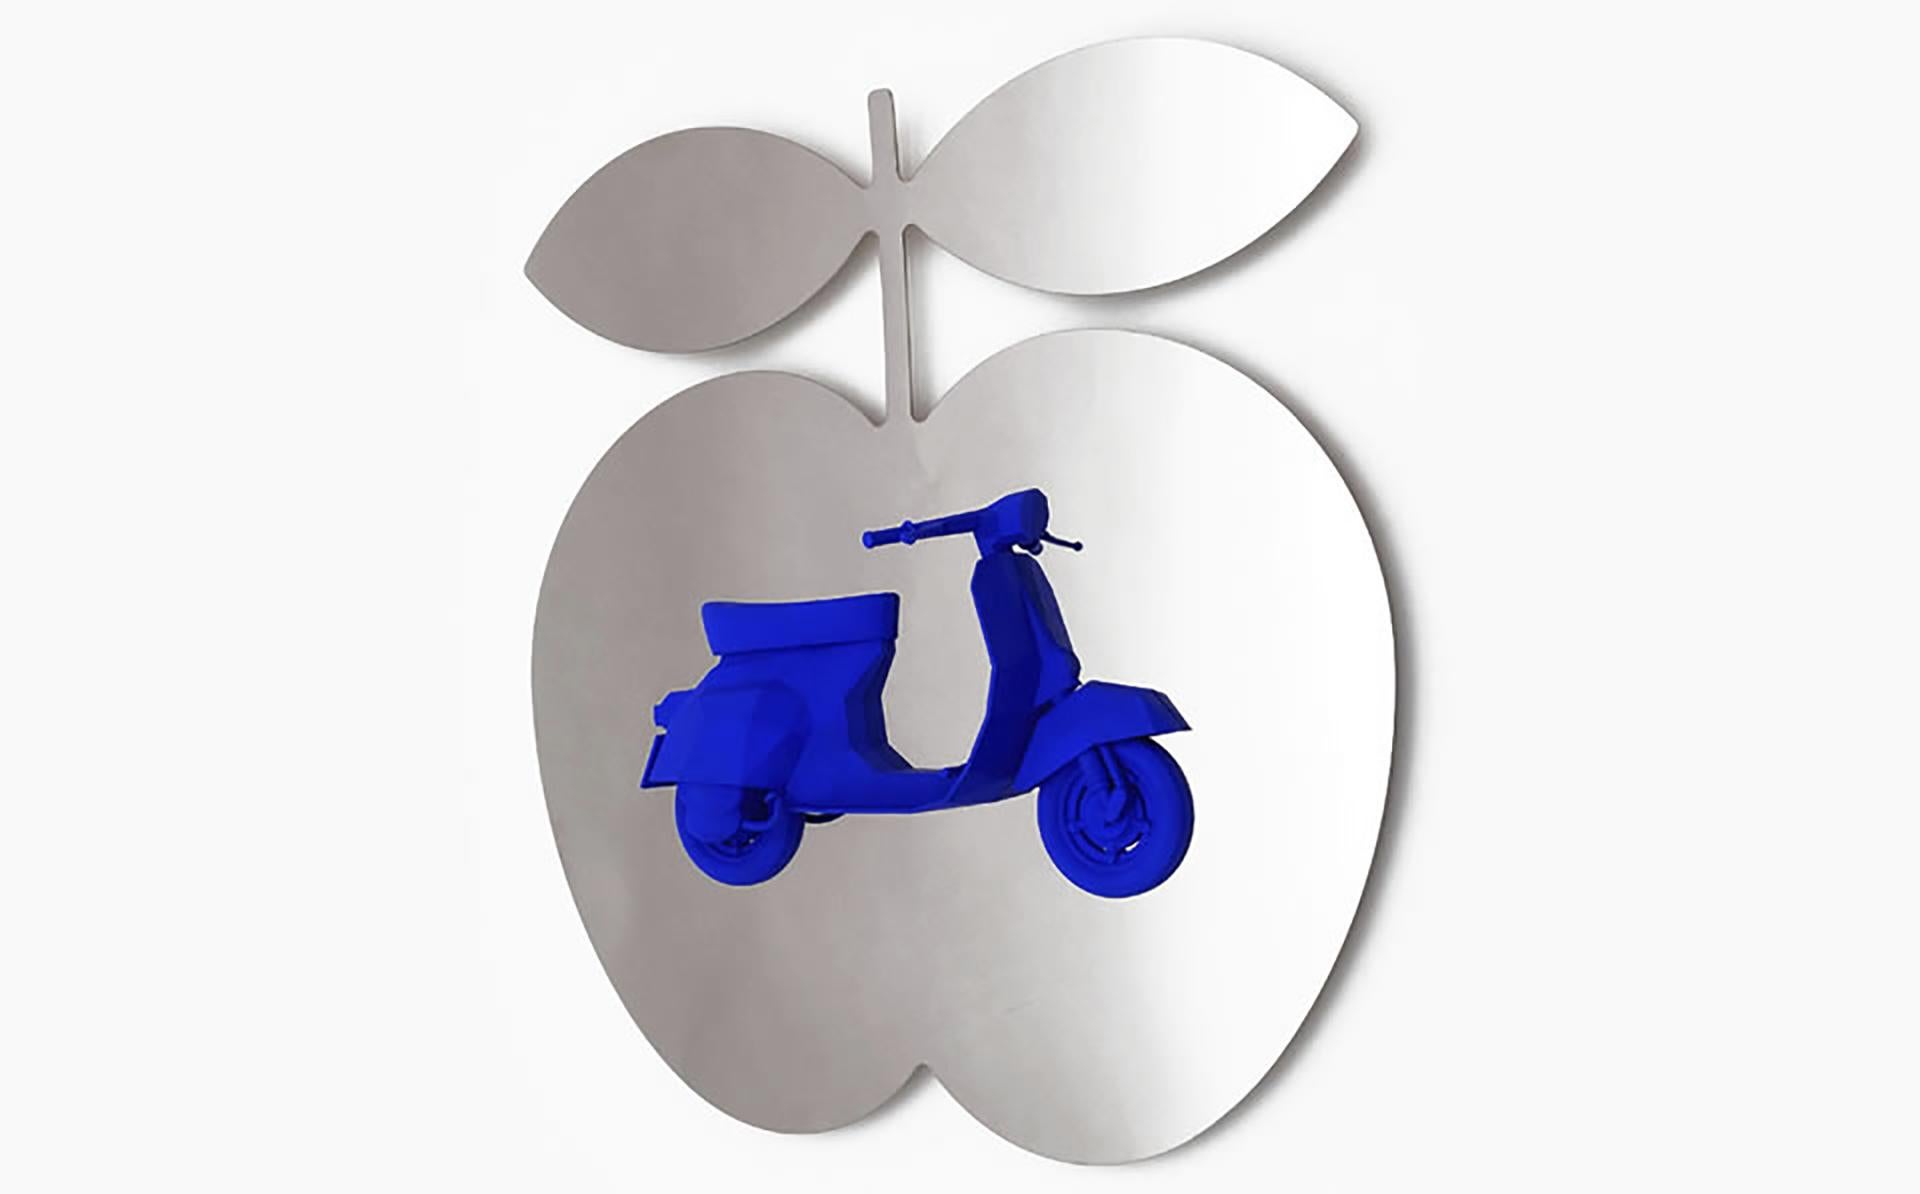 TITLE: Chi Vespa?
ARTIST: Daniele Basso
YEAR: 2018
MEDIUM TYPE: Sculpture
MEDIUM/MATERIALS: Stainless Steel mirror, resin and Blue Colour
DIMENSIONS: 50 x 50 cm

